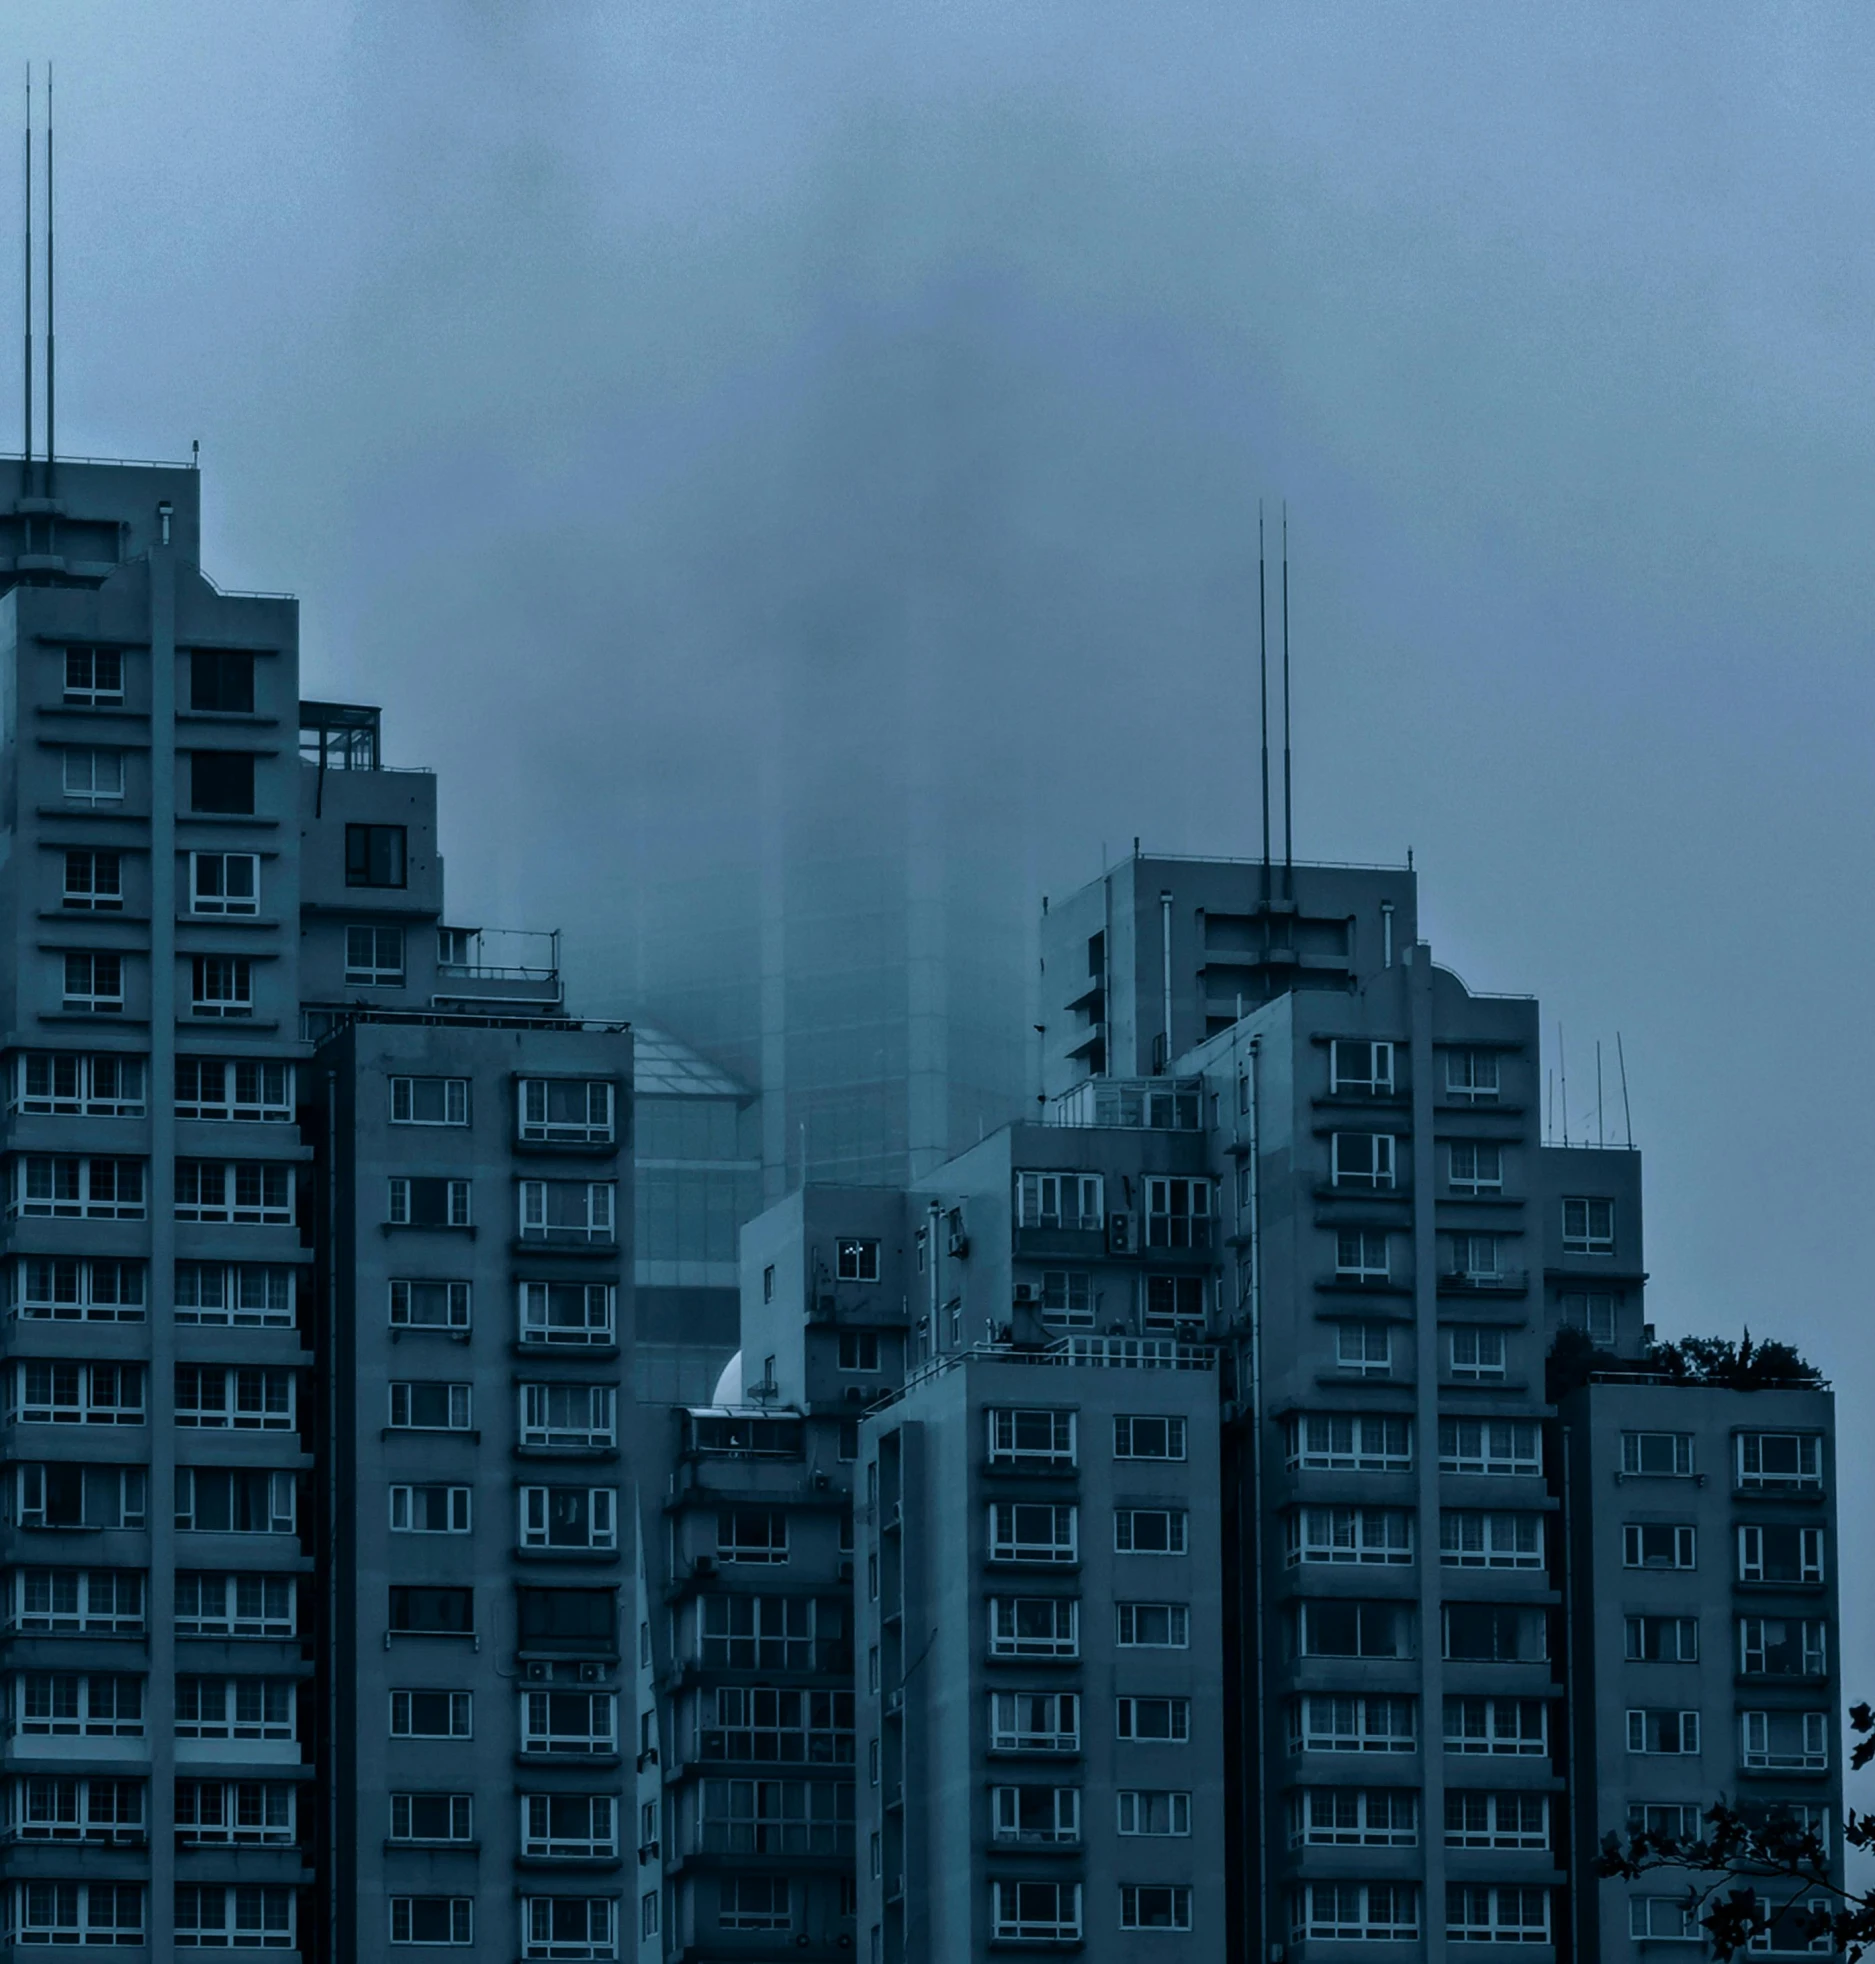 the tall buildings stand in the fog, under a grey sky